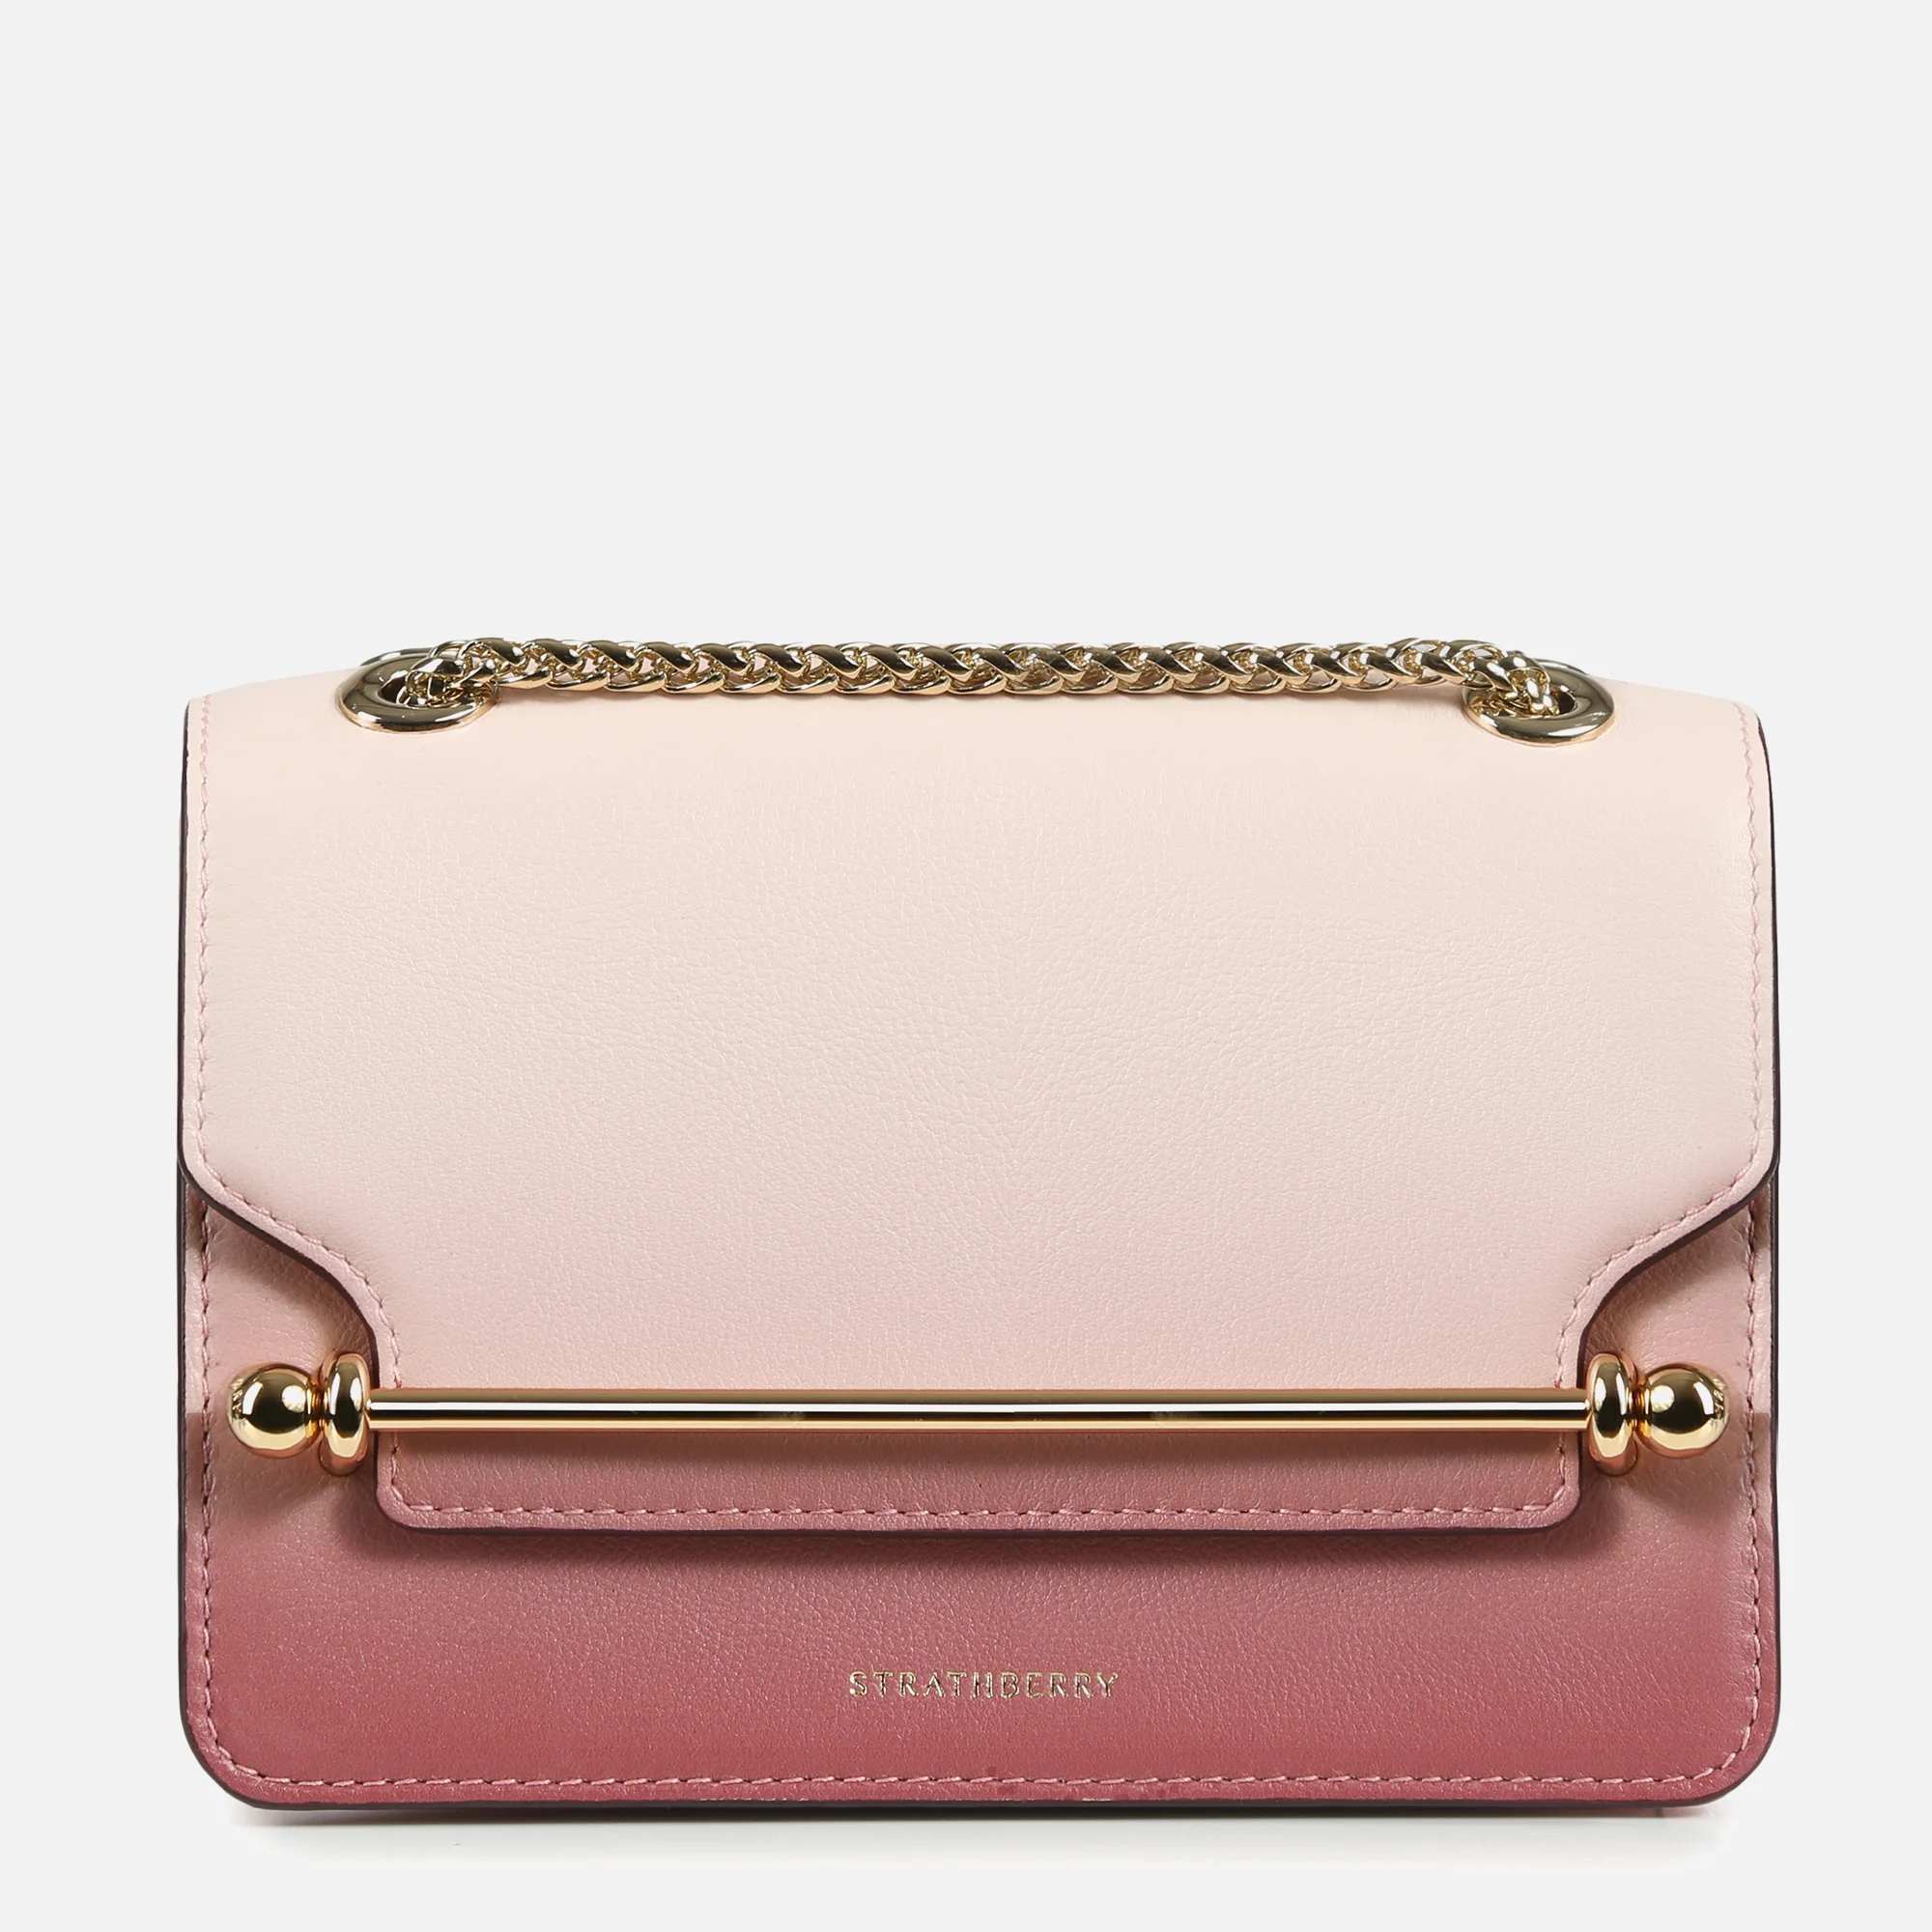 Strathberry Women's East/West Mini Bag - Soft Pink Image 1